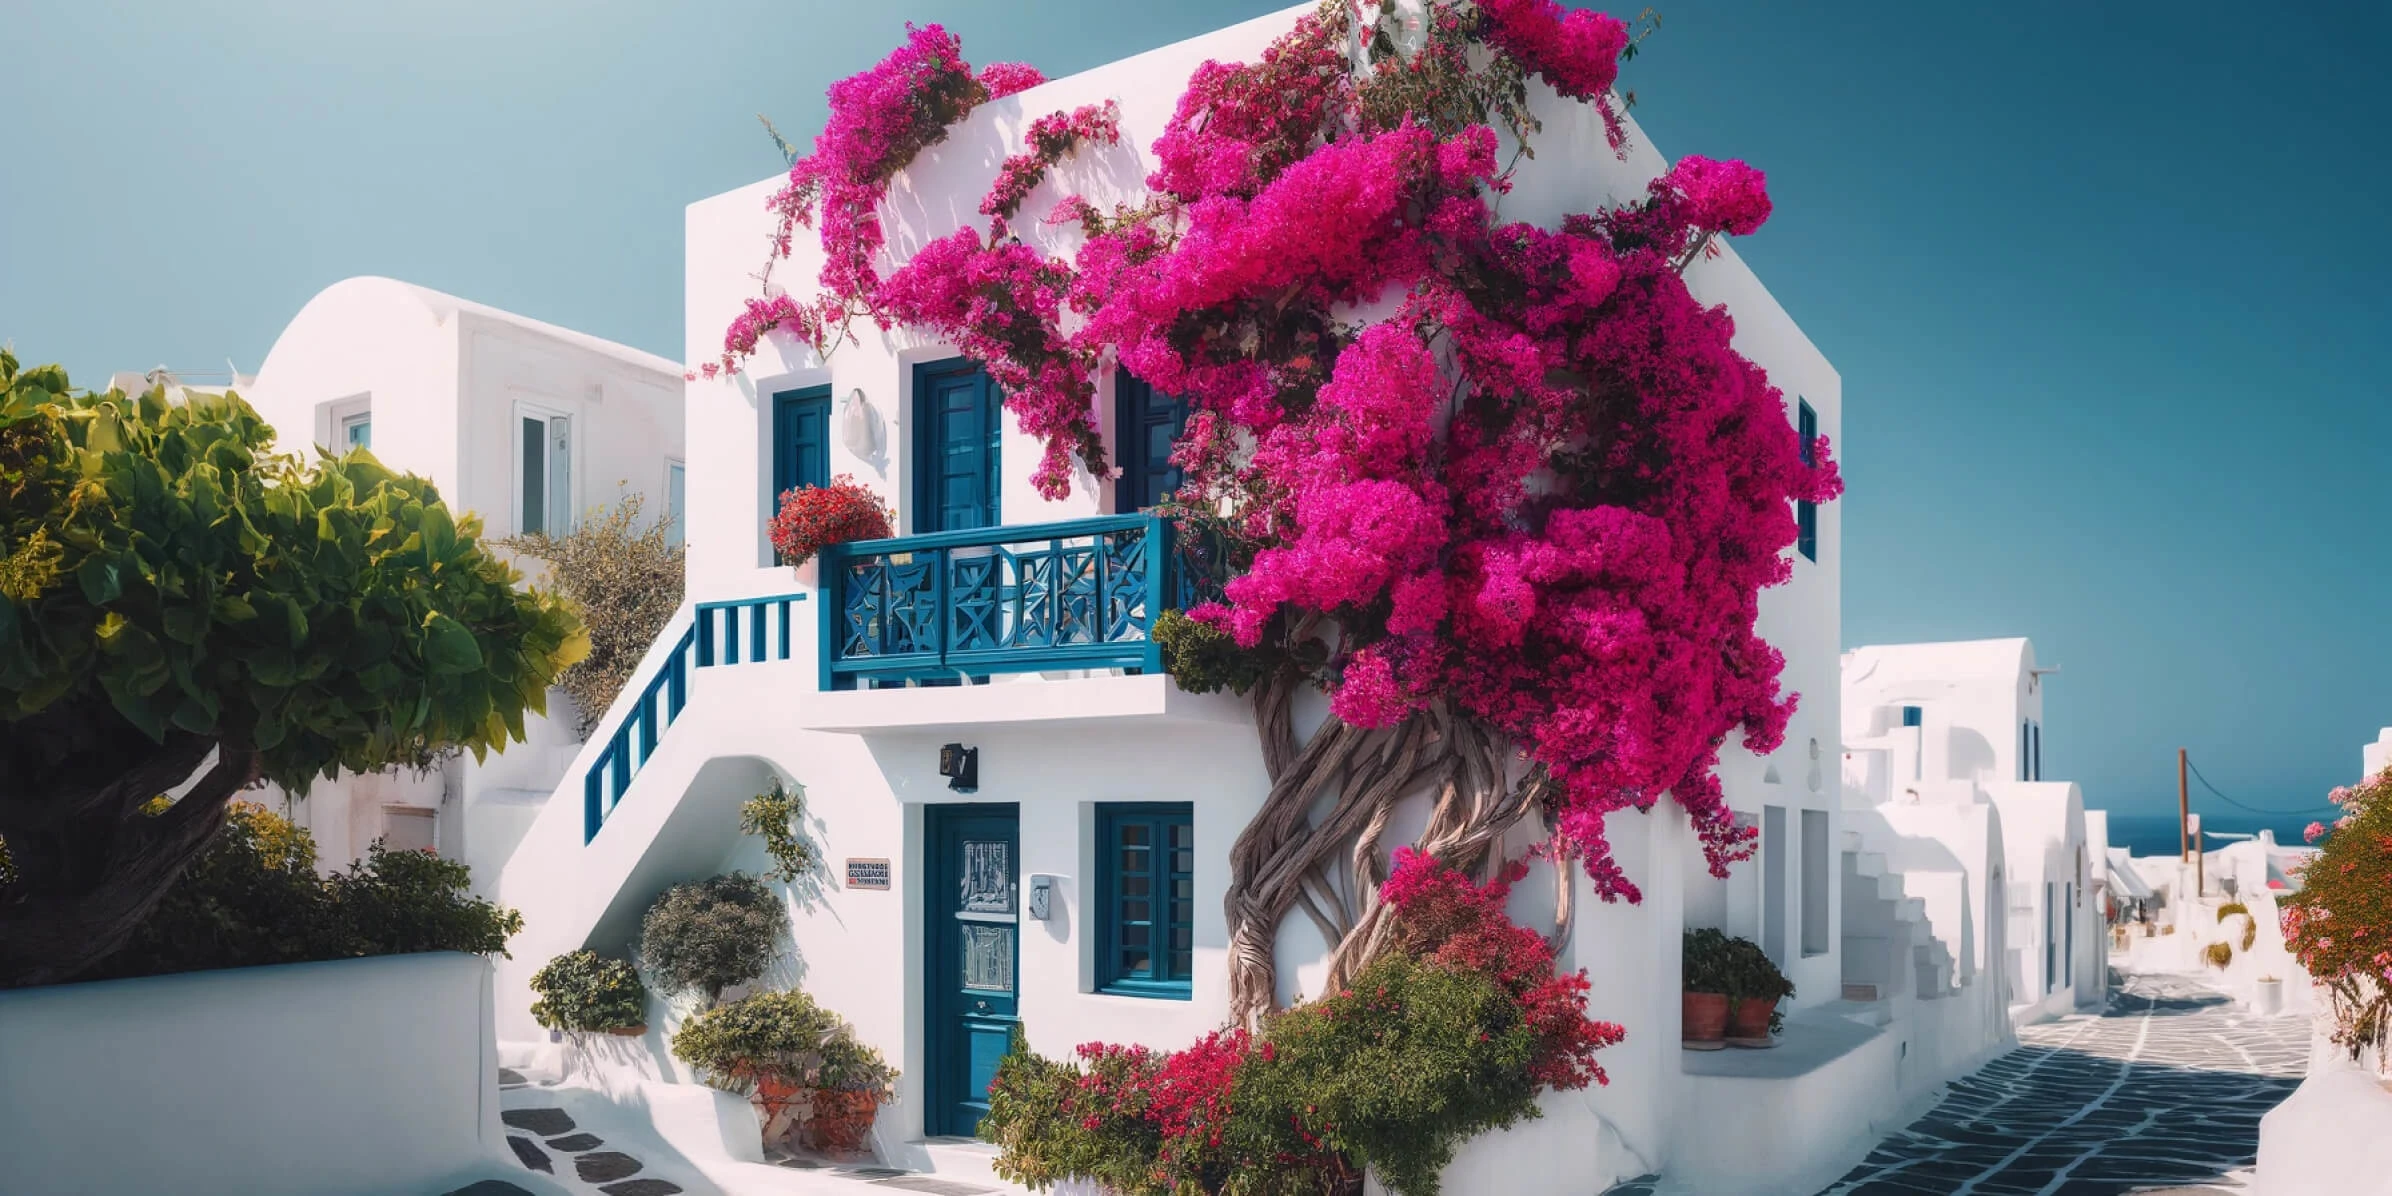 White Cycladic houses with blue accents and vibrant magenta bougainvillea in a serene Greek island setting.